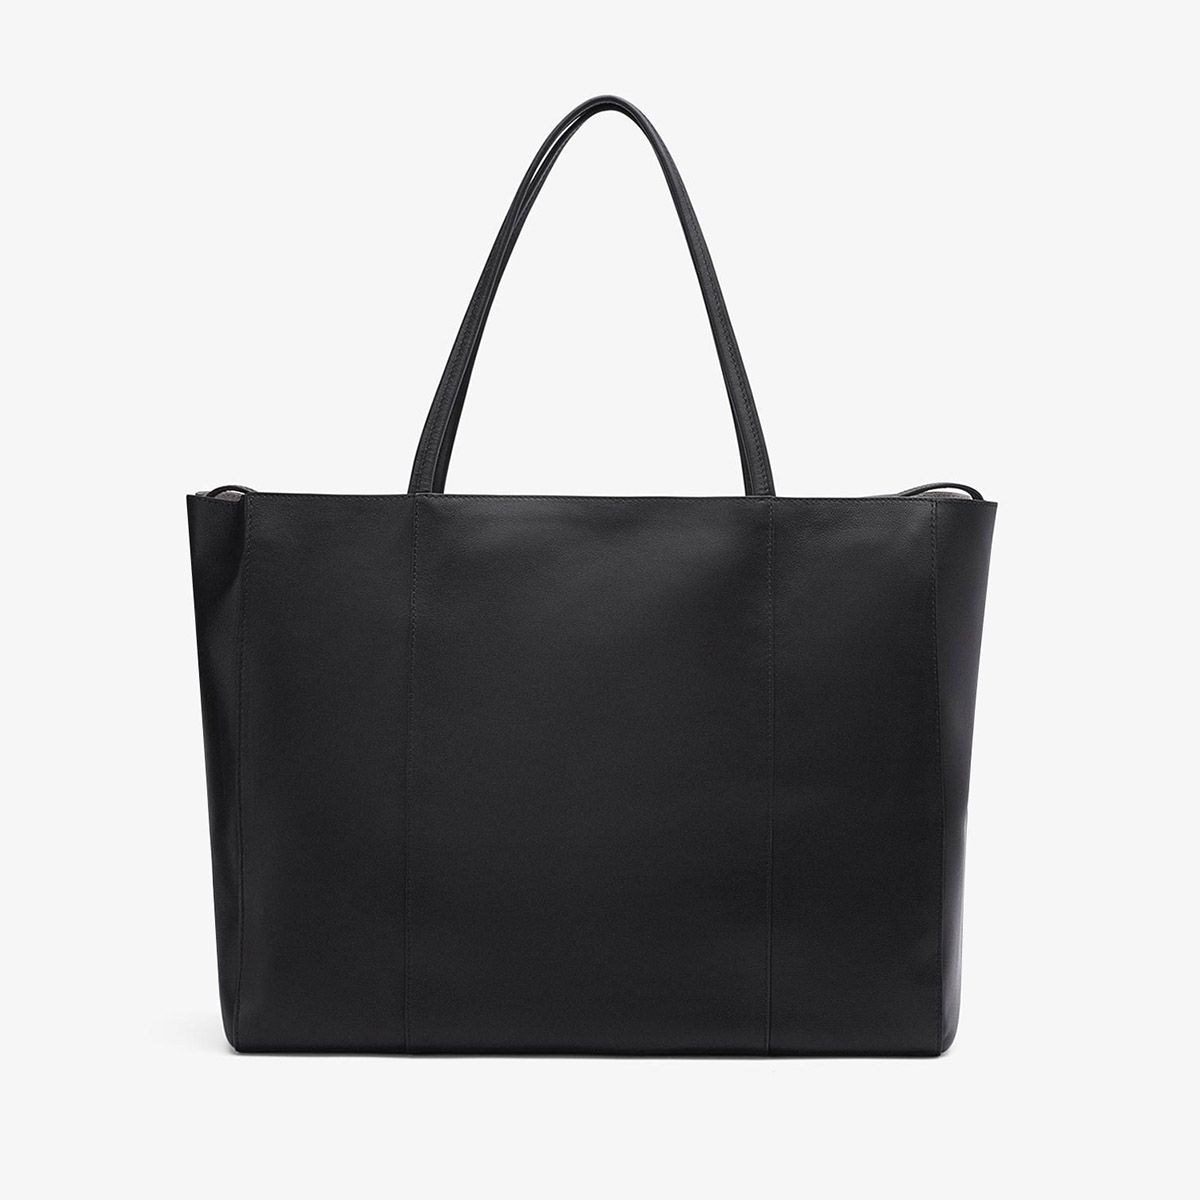 Italic’s Leather Tote Is Made in Prada and Celine’s Factory | InStyle